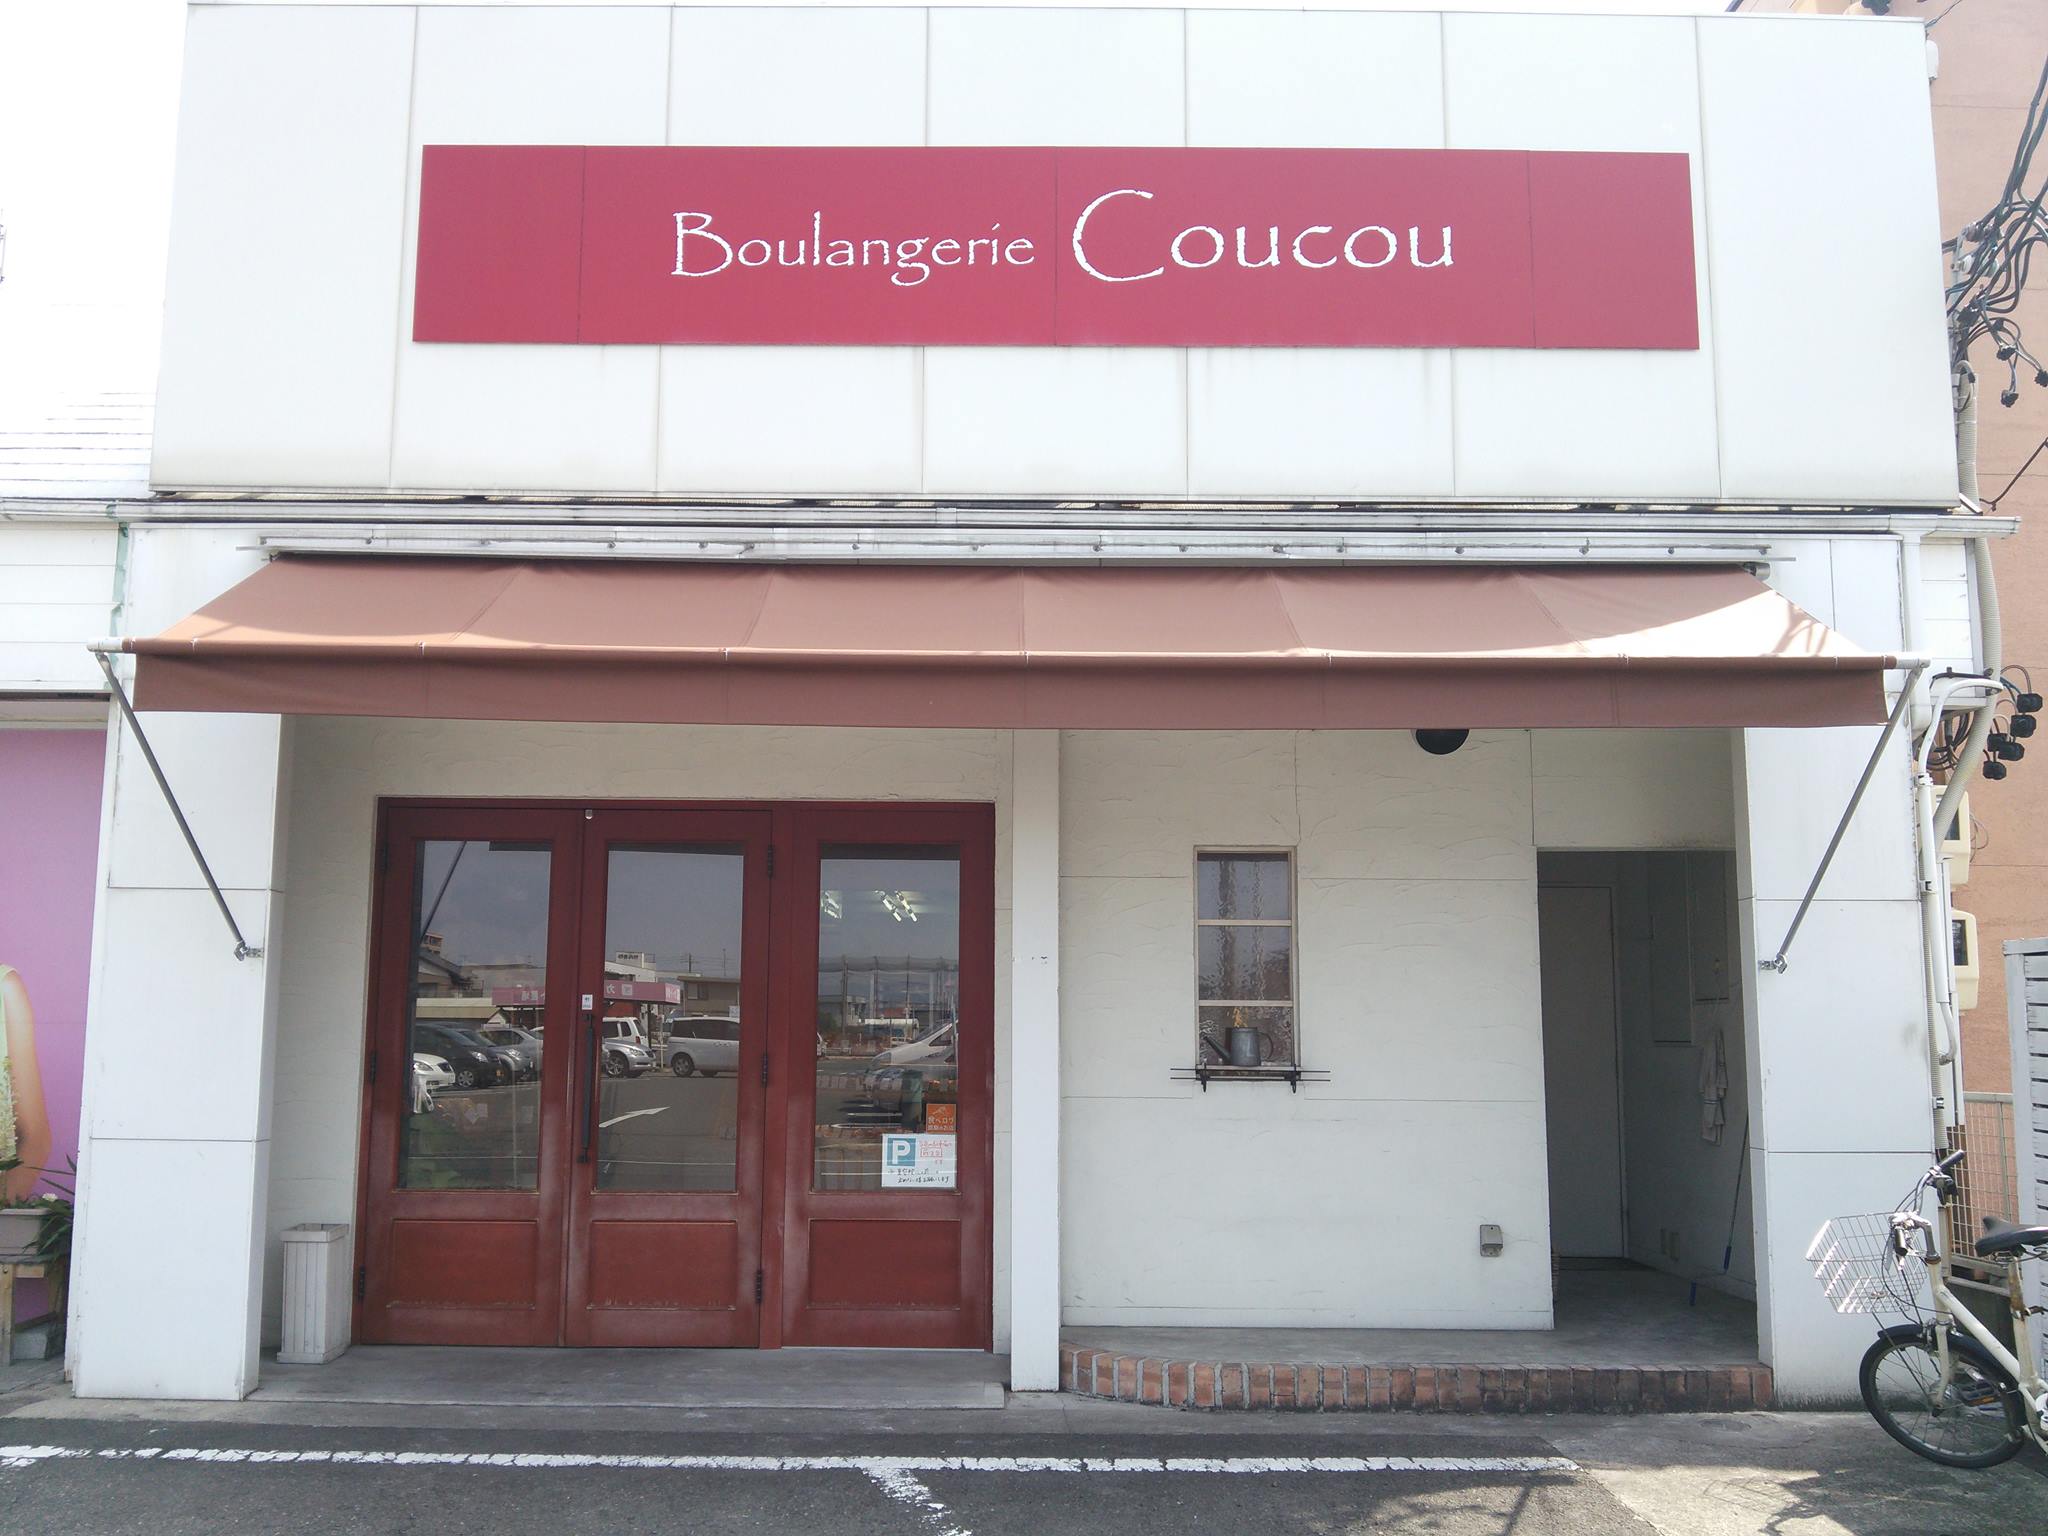 Boulangerie Coucou（ブーランジェリー クークー）